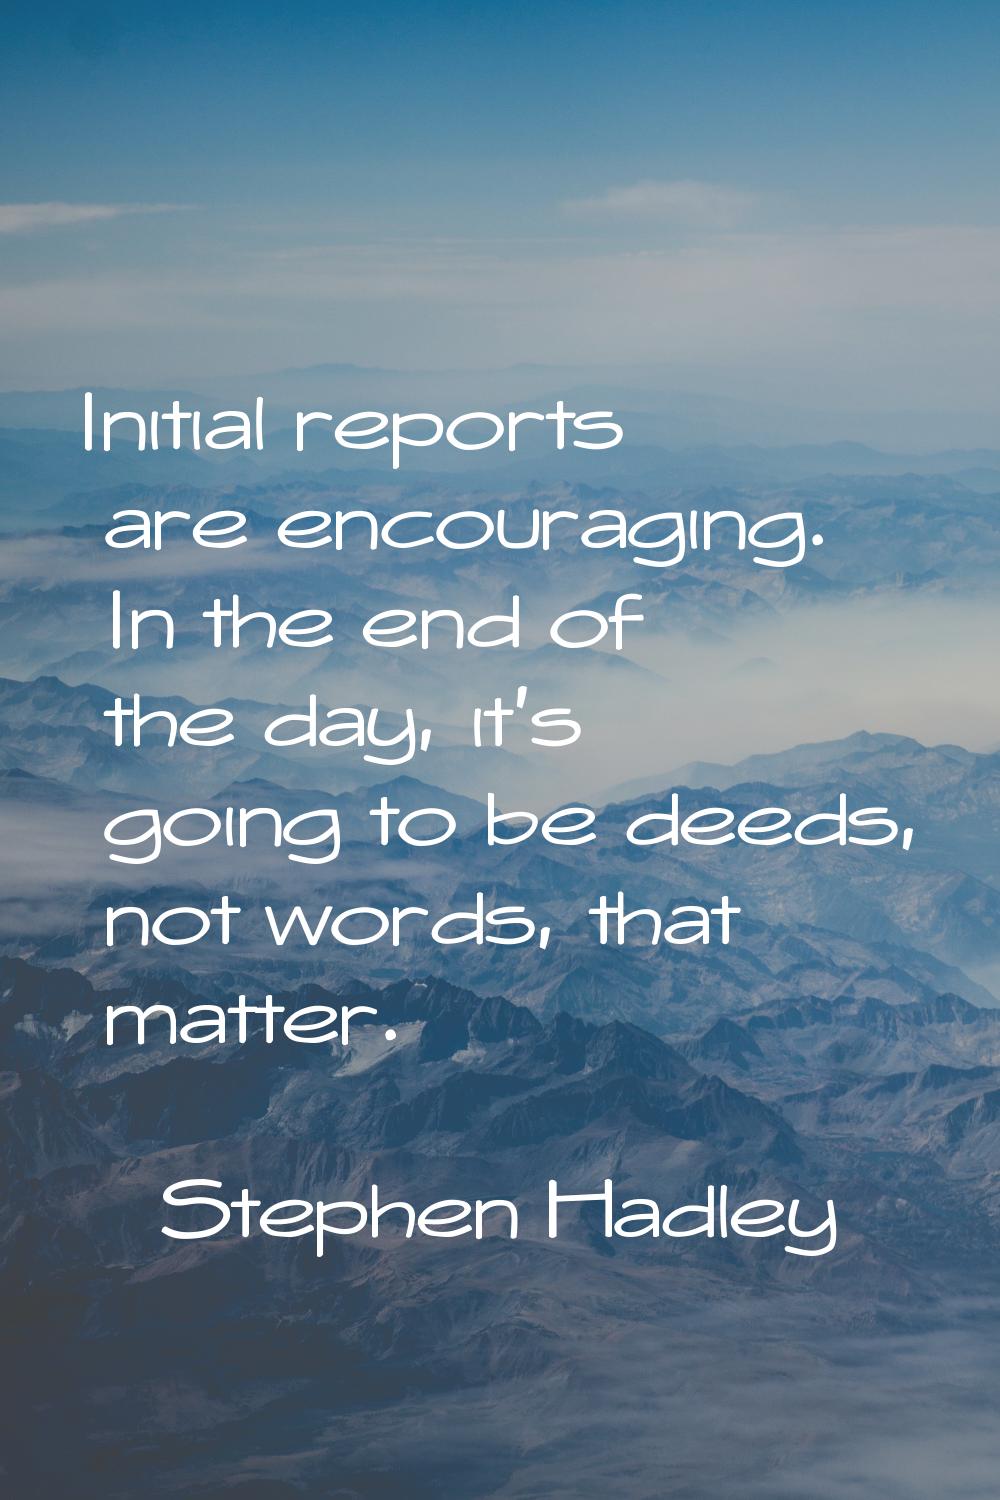 Initial reports are encouraging. In the end of the day, it's going to be deeds, not words, that mat